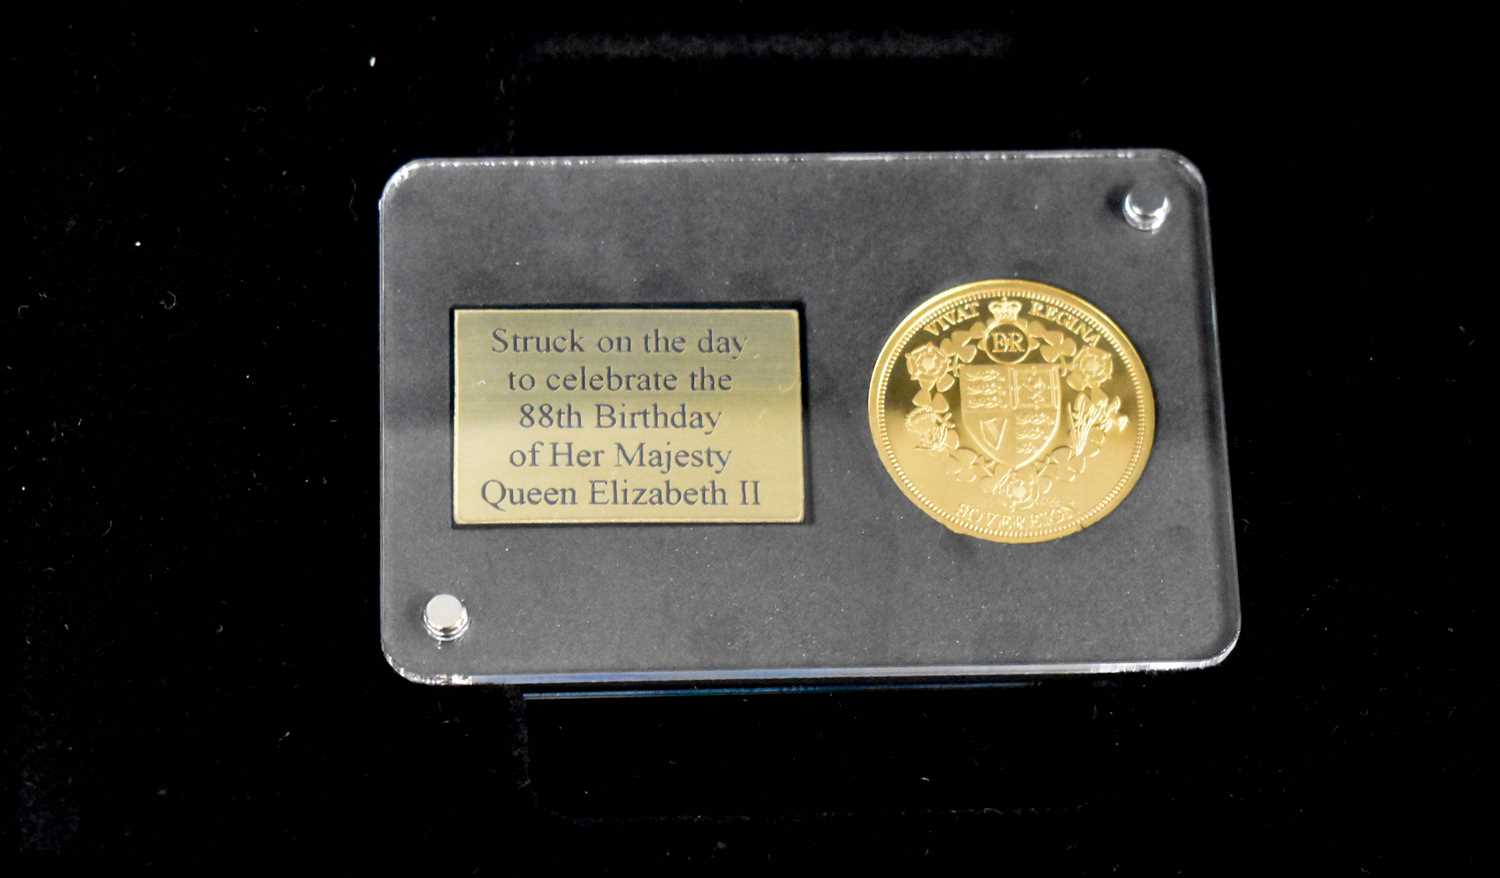 The Life of Queen Elizabeth II, 88th Birthday gold proof Sovereign, limited edition 88/499, - Image 2 of 2